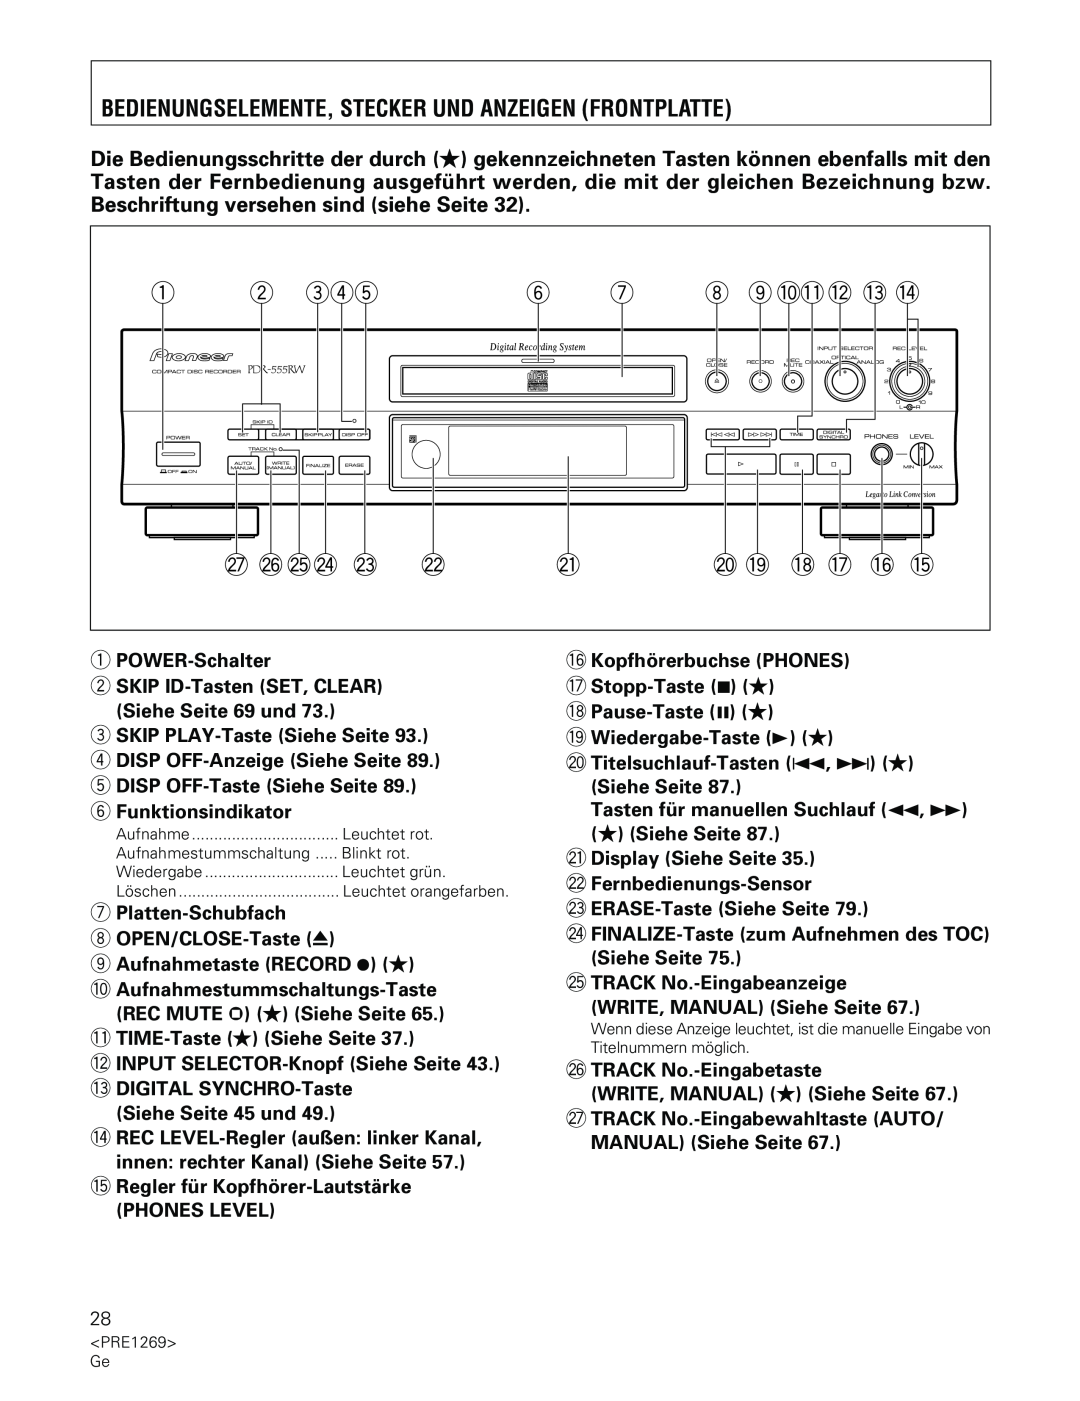 Pioneer PDR-555RW operating instructions 1POWER-Schalter 